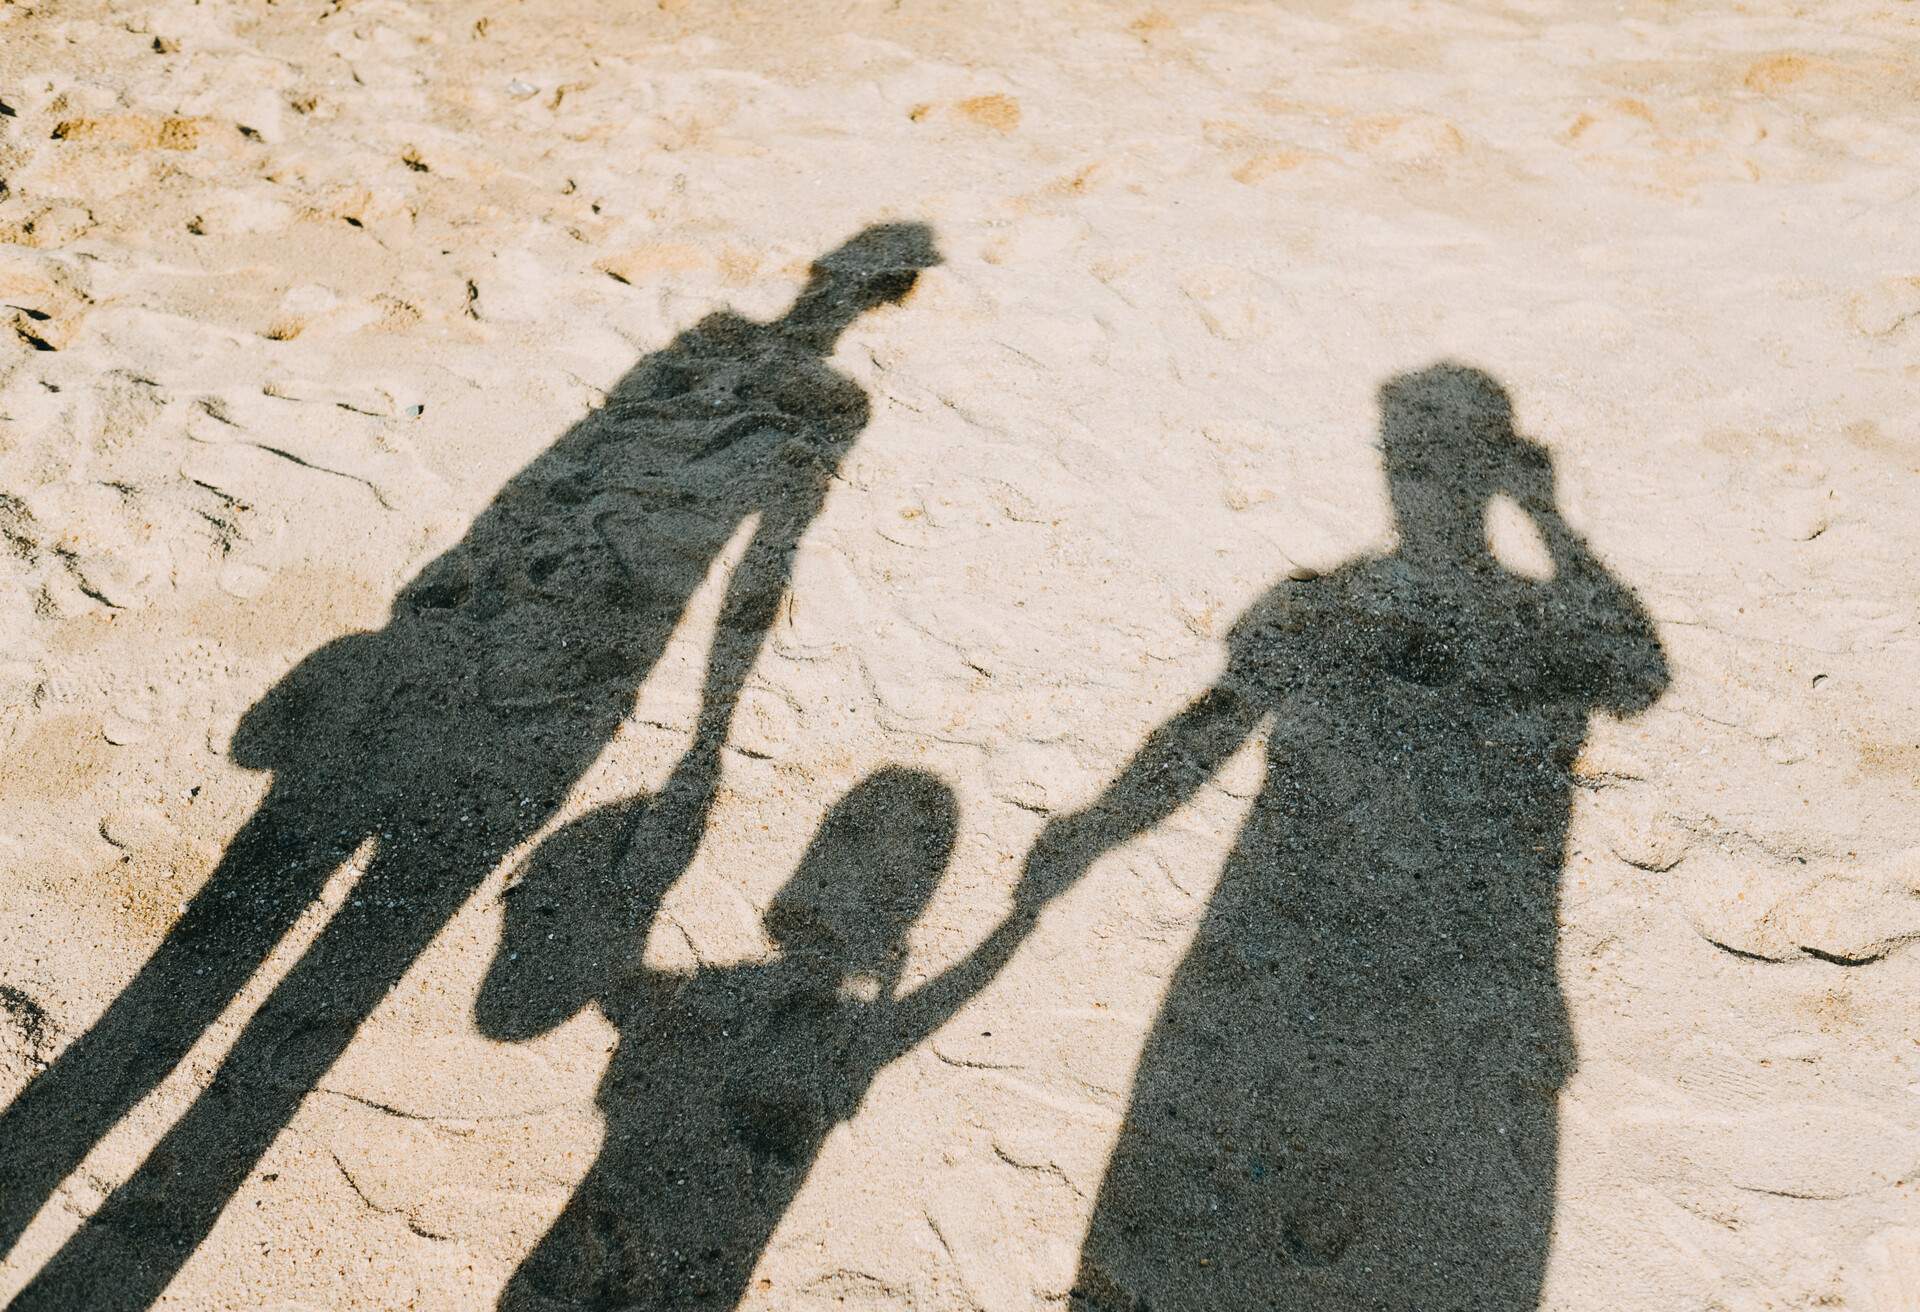 Three people holding hands cast shadows on the sand.